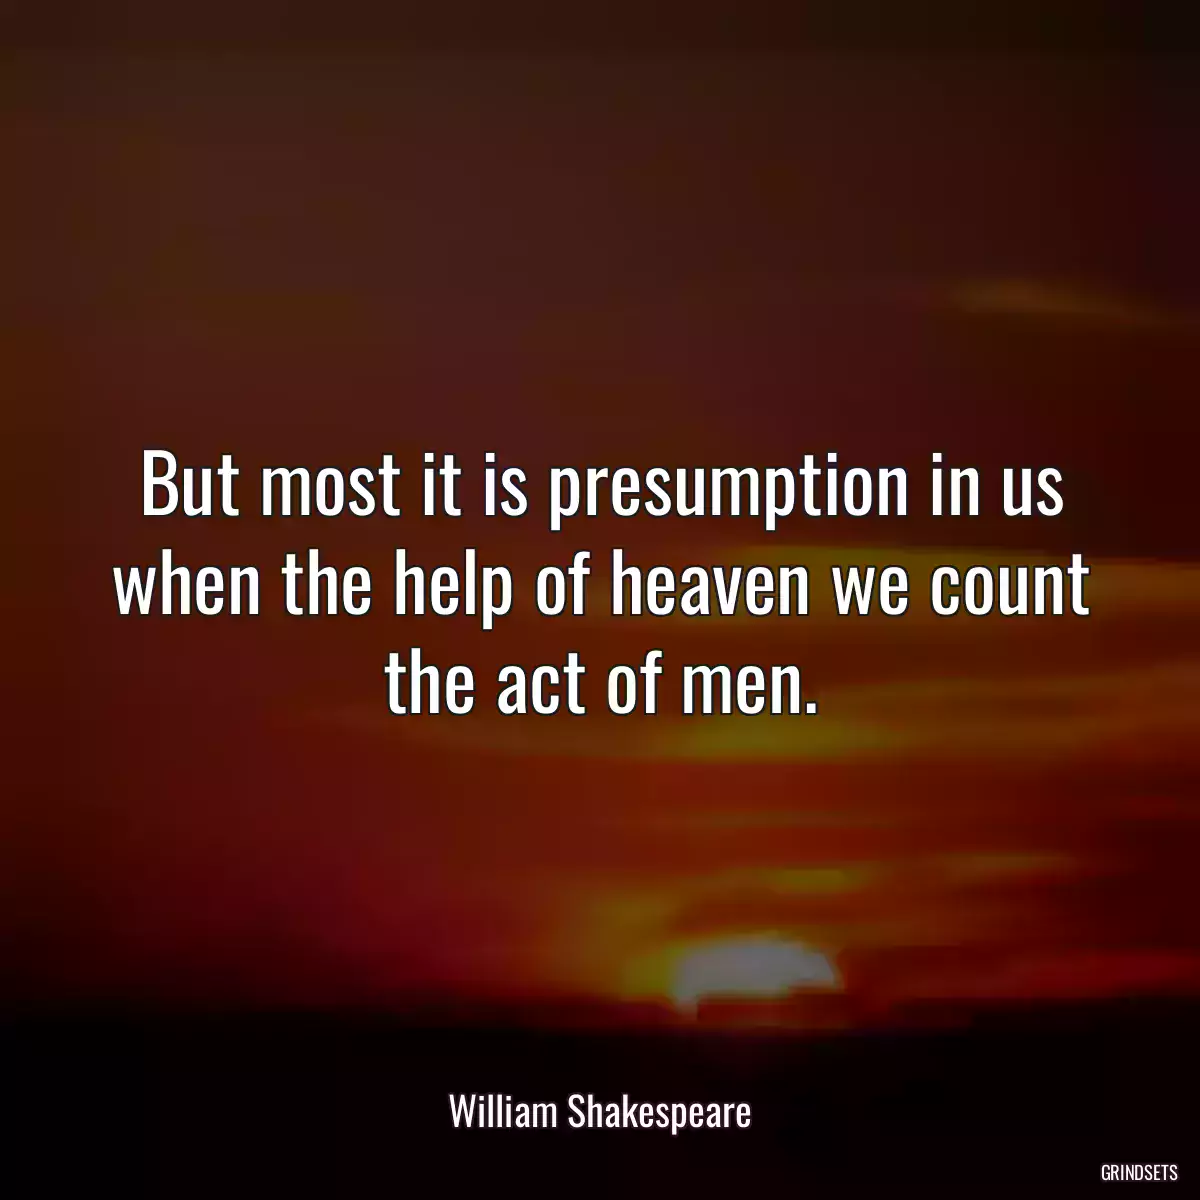 But most it is presumption in us when the help of heaven we count the act of men.